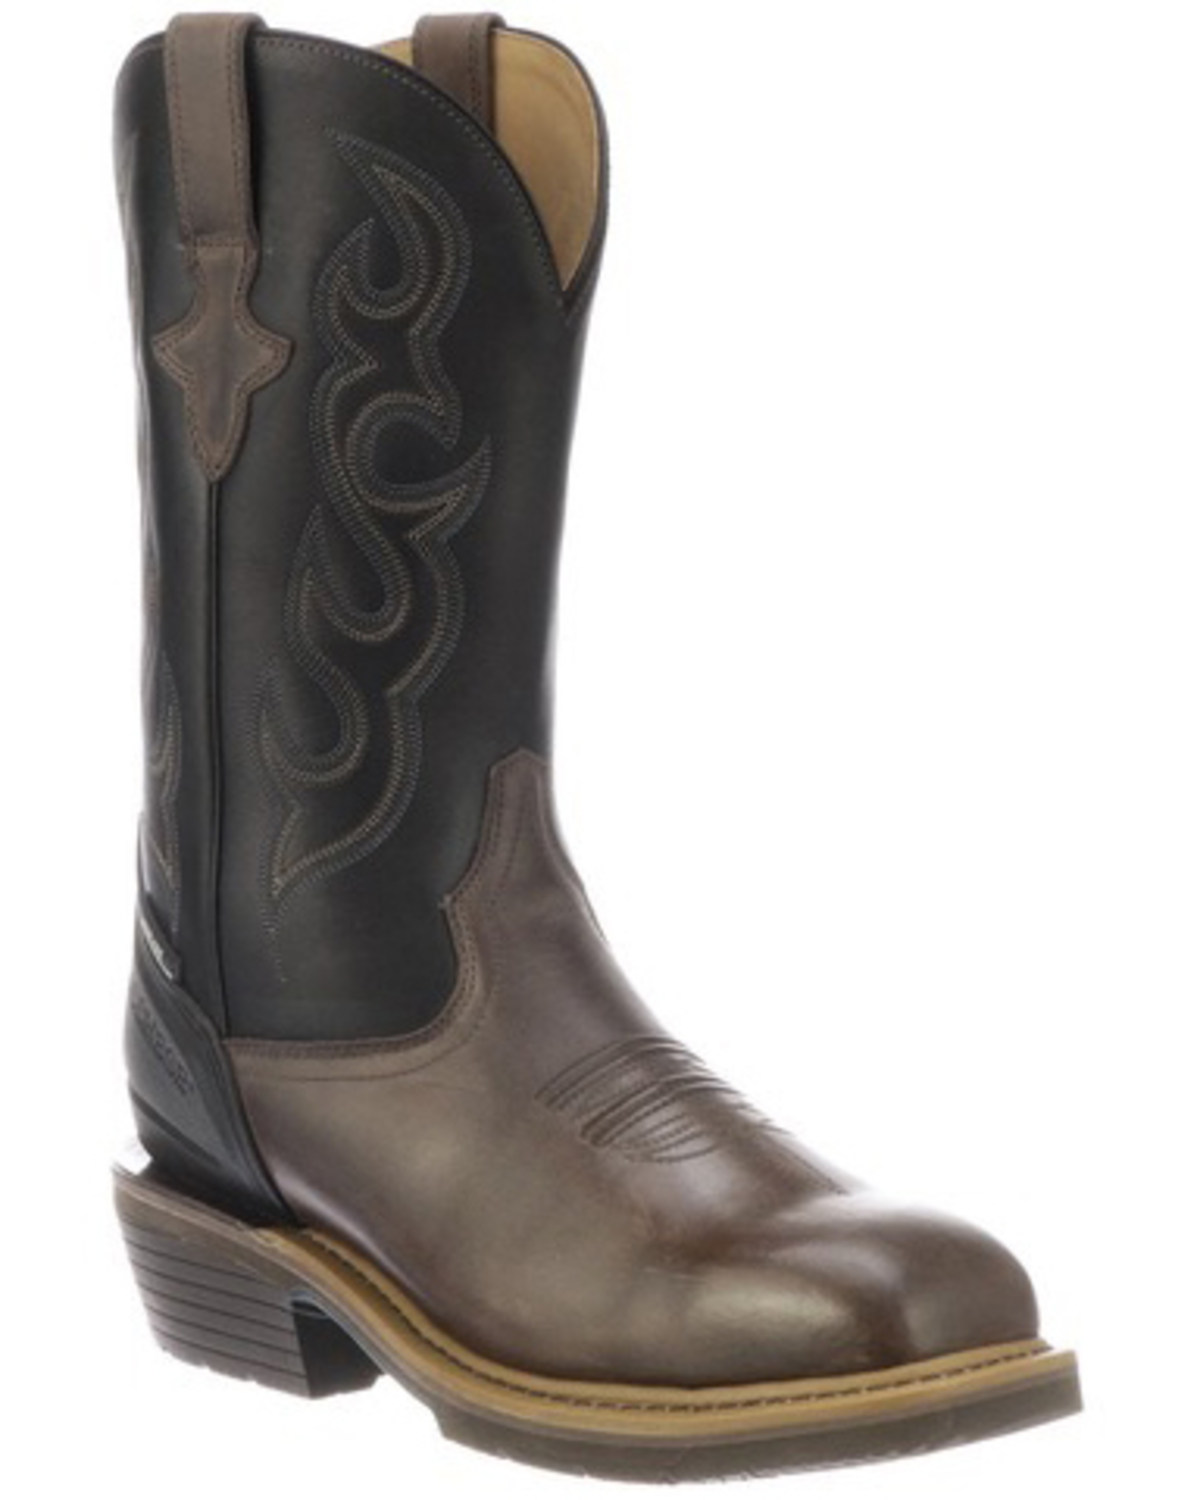 Lucchese Men's Welted Western Work 